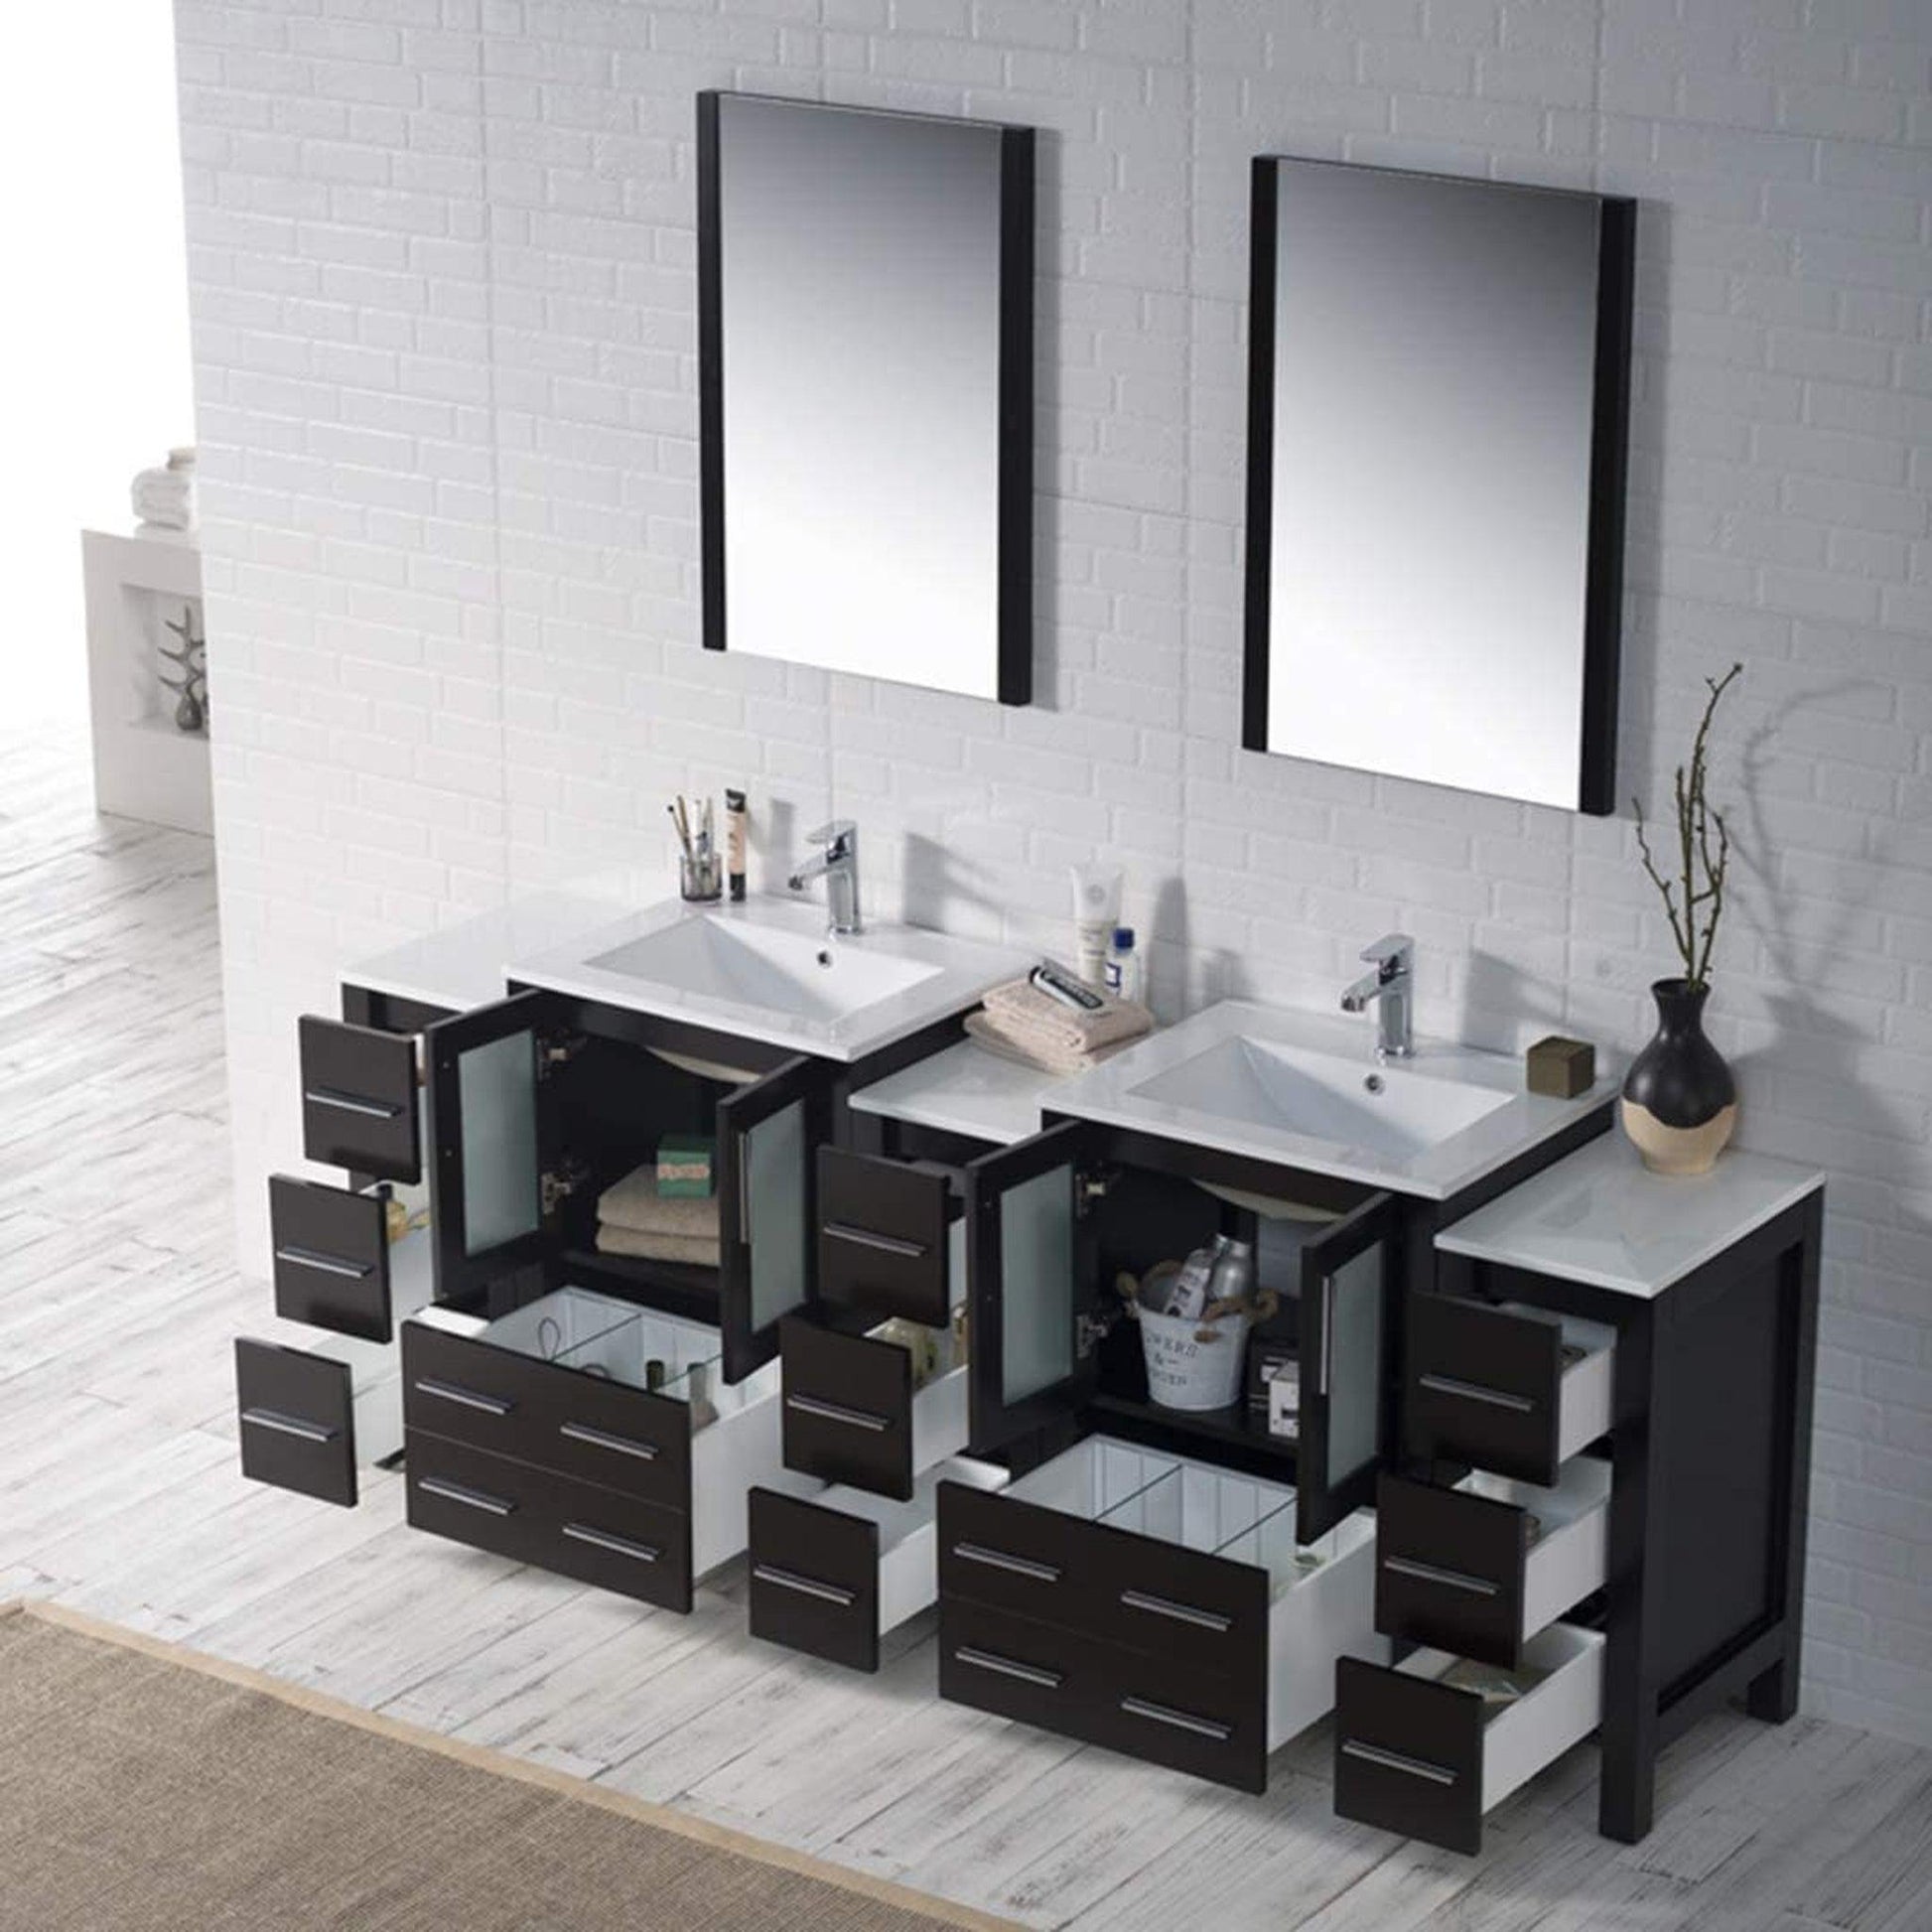 Blossom Sydney 84" Espresso Freestanding Vanity With Integrated Double Sinks Ceramic Top and Three Side Cabinet